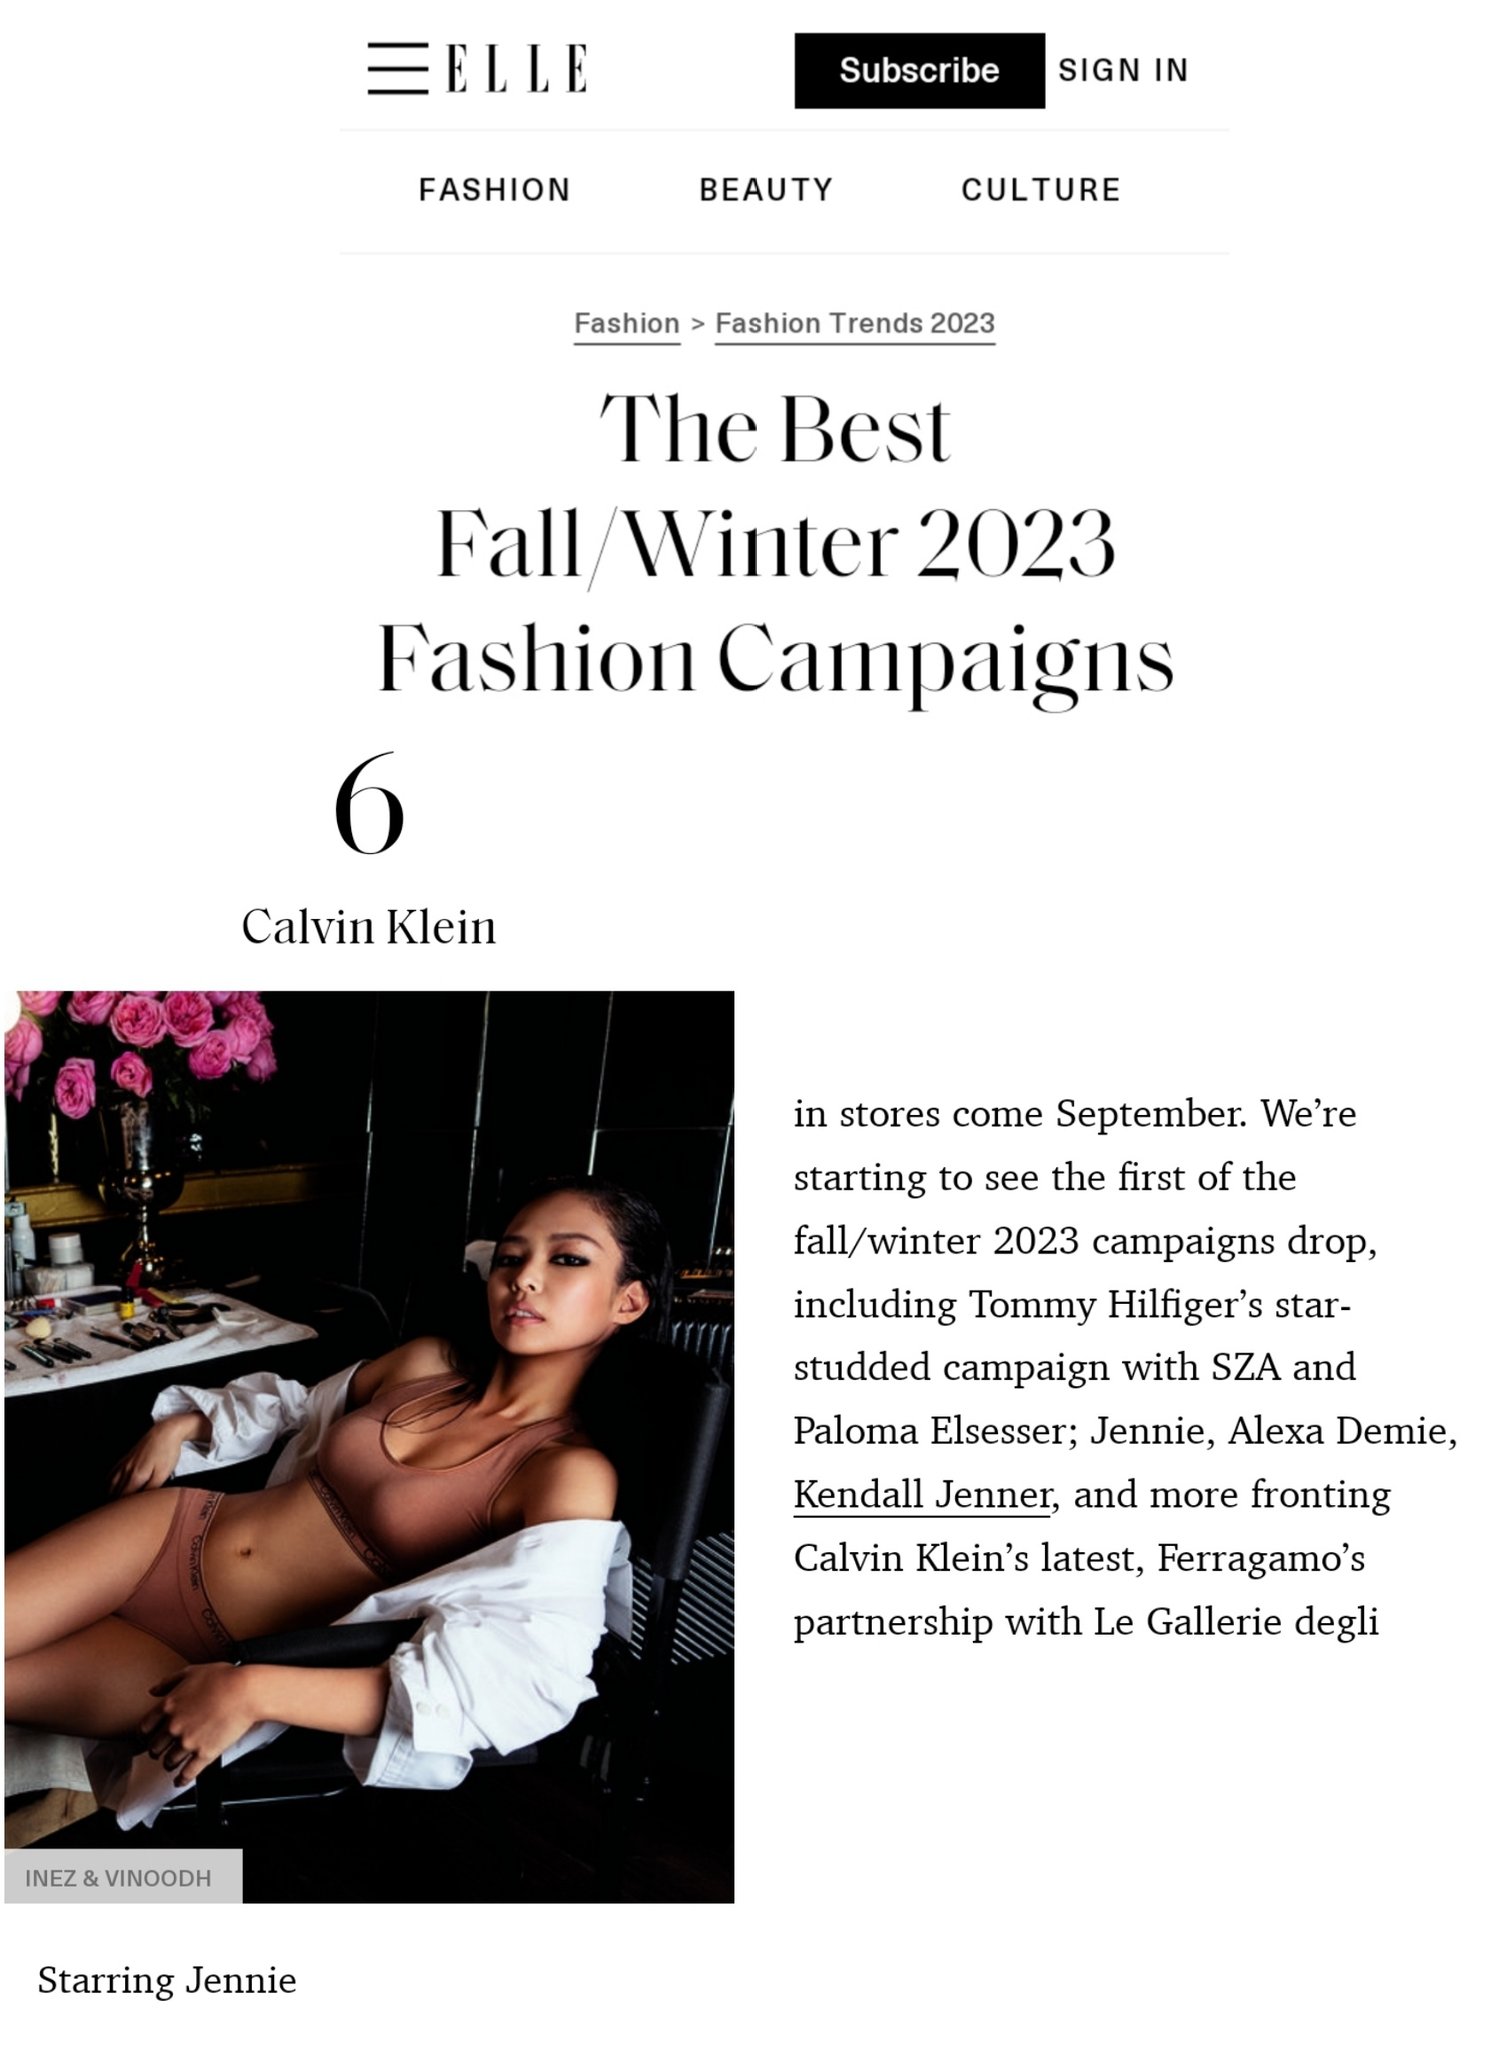 Kendall Jenner, Alexa Demie, Jennie and more in Calvin Klein's